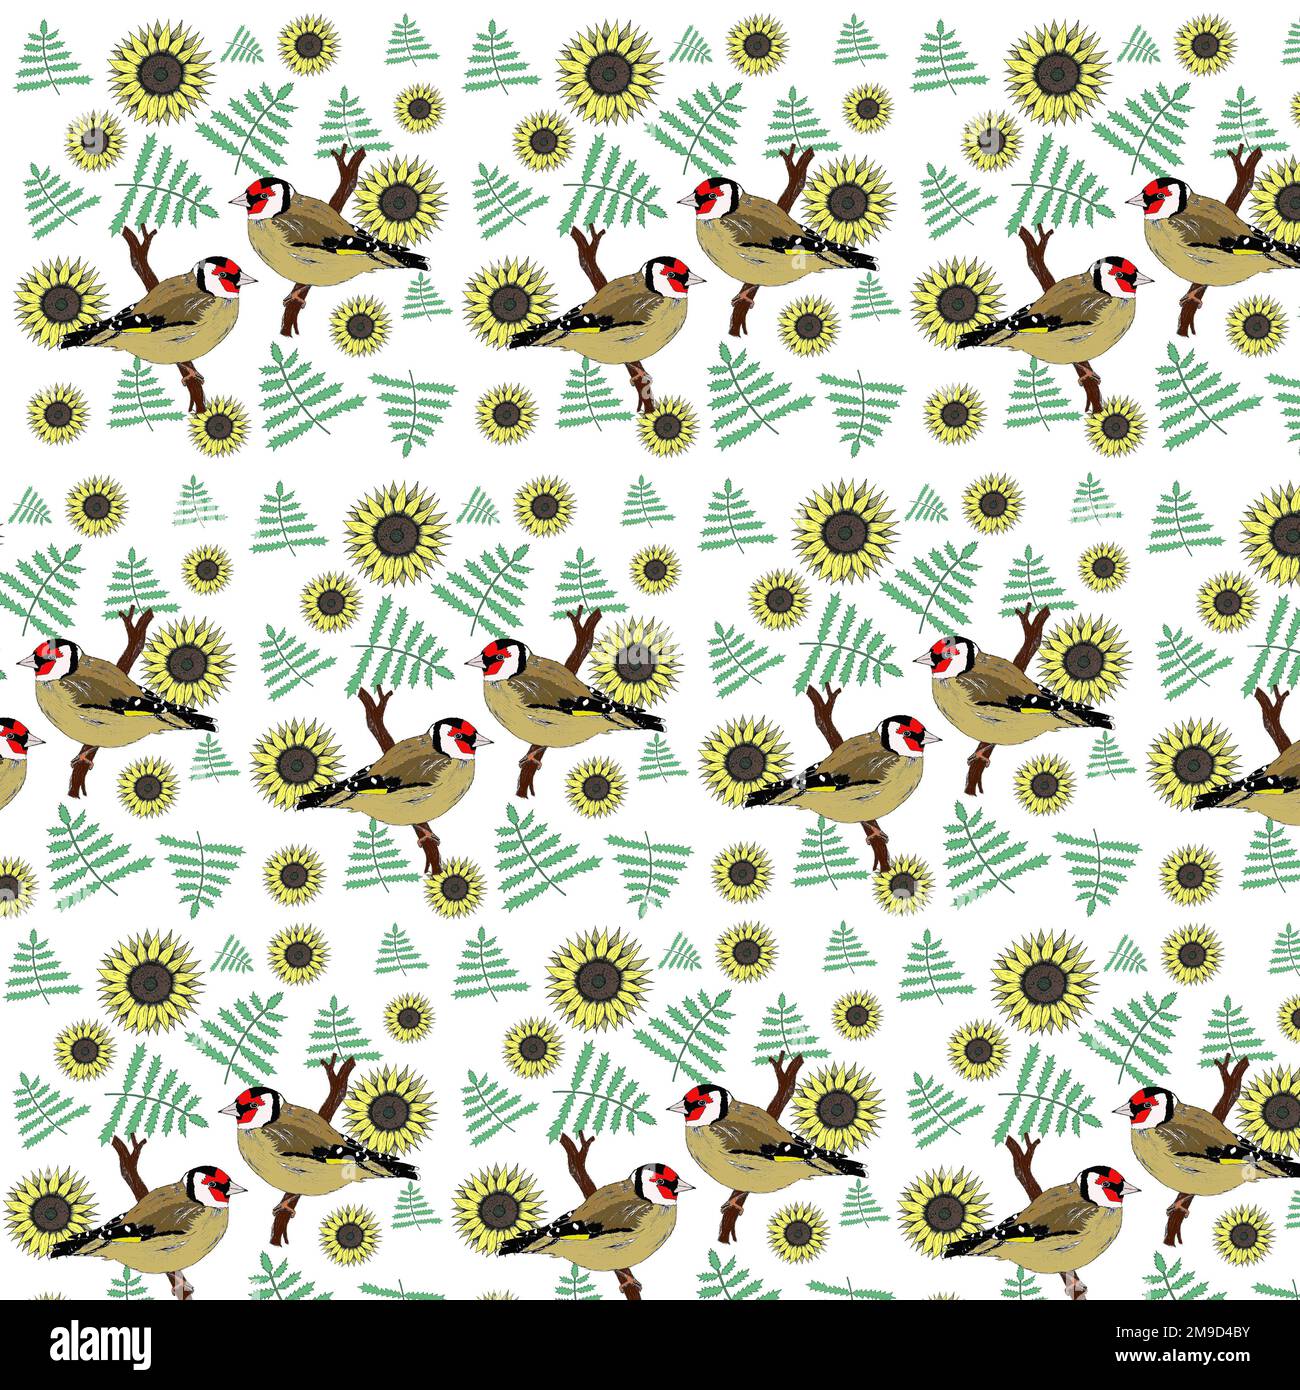 A repeating pattern featuring goldfinches on a branch, leaves and sunflowers. Stock Photo